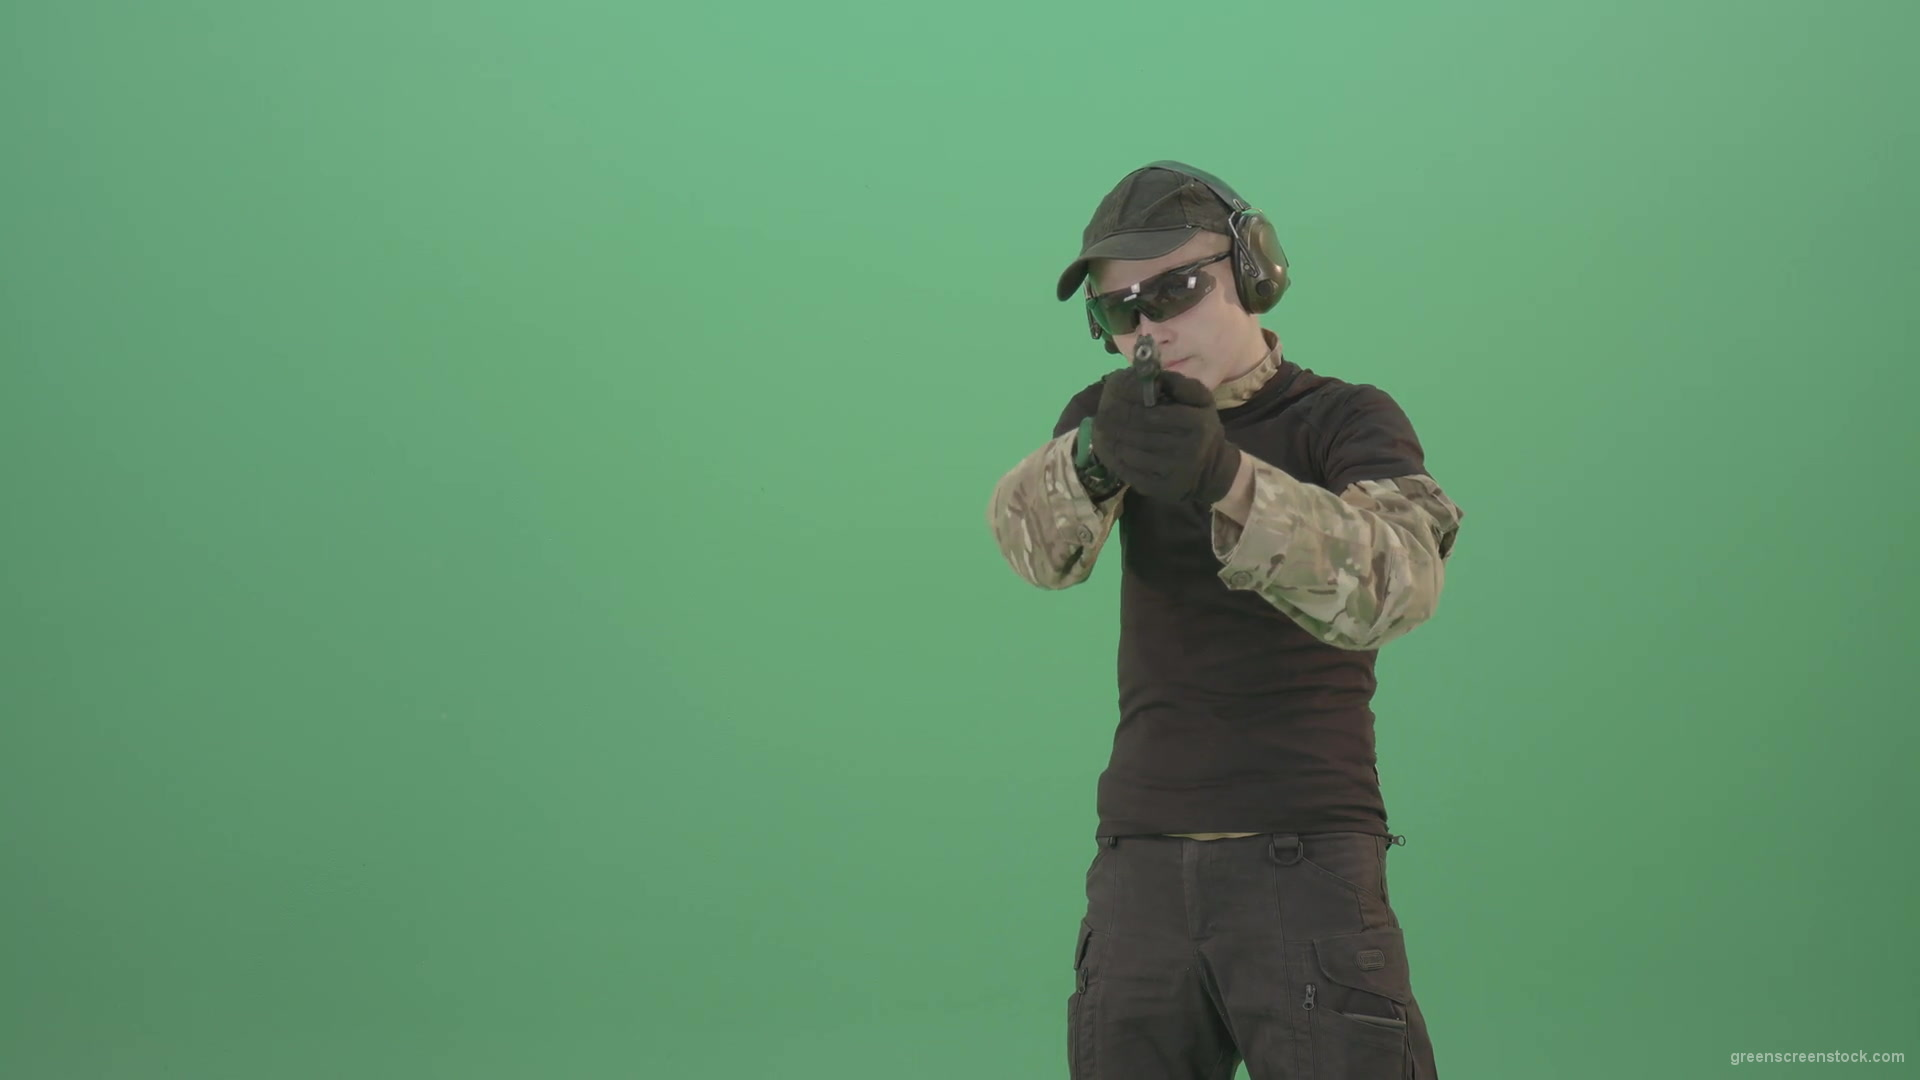 Young-boy-sodier-testin-small-pistol-gun-and-shooting-isolated-on-green-screen-4K-Video-Footage-1920_008 Green Screen Stock